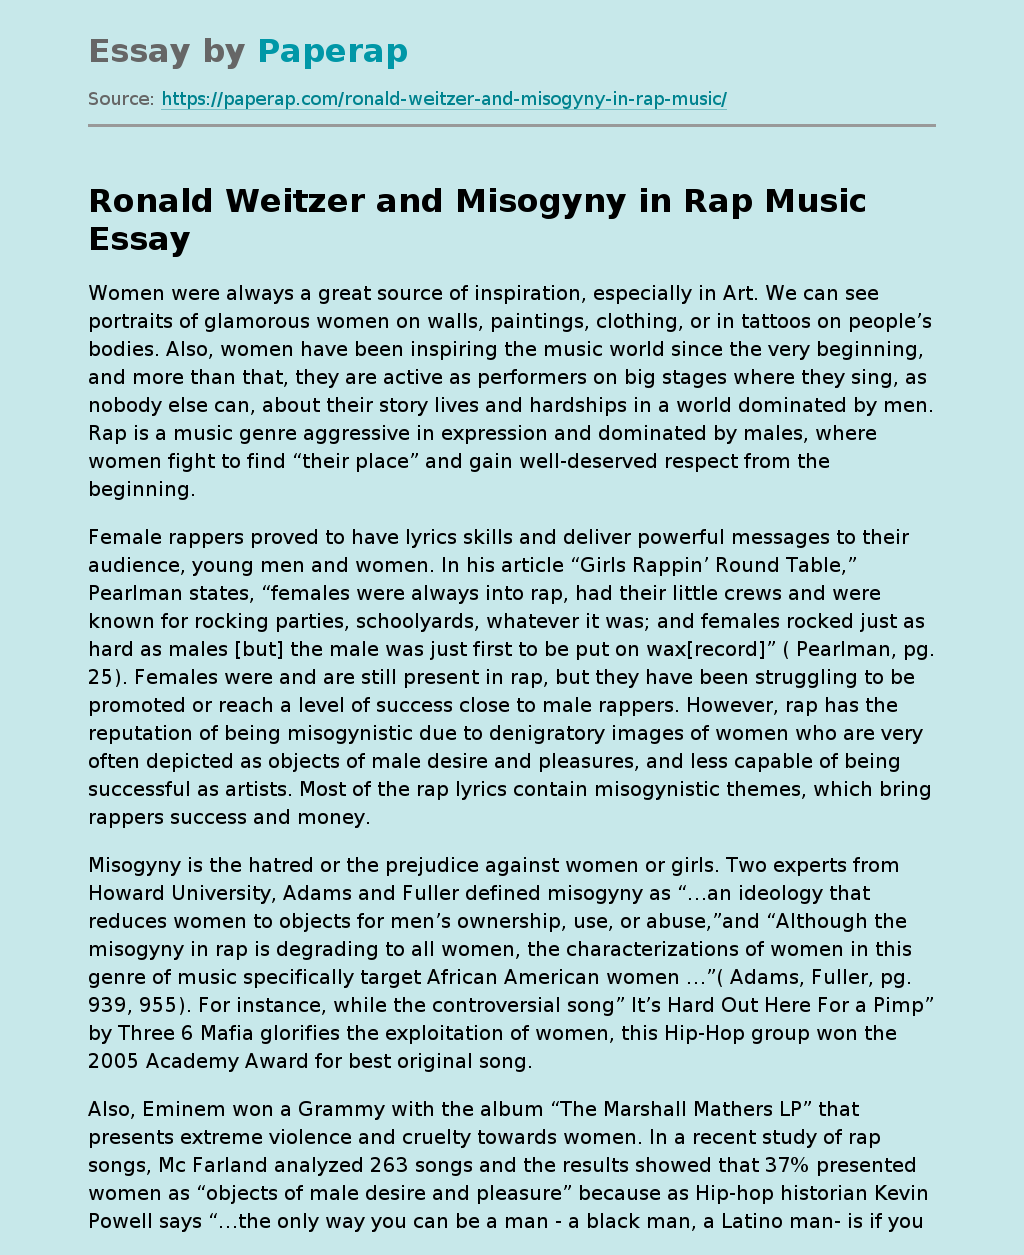 Ronald Weitzer and Misogyny in Rap Music